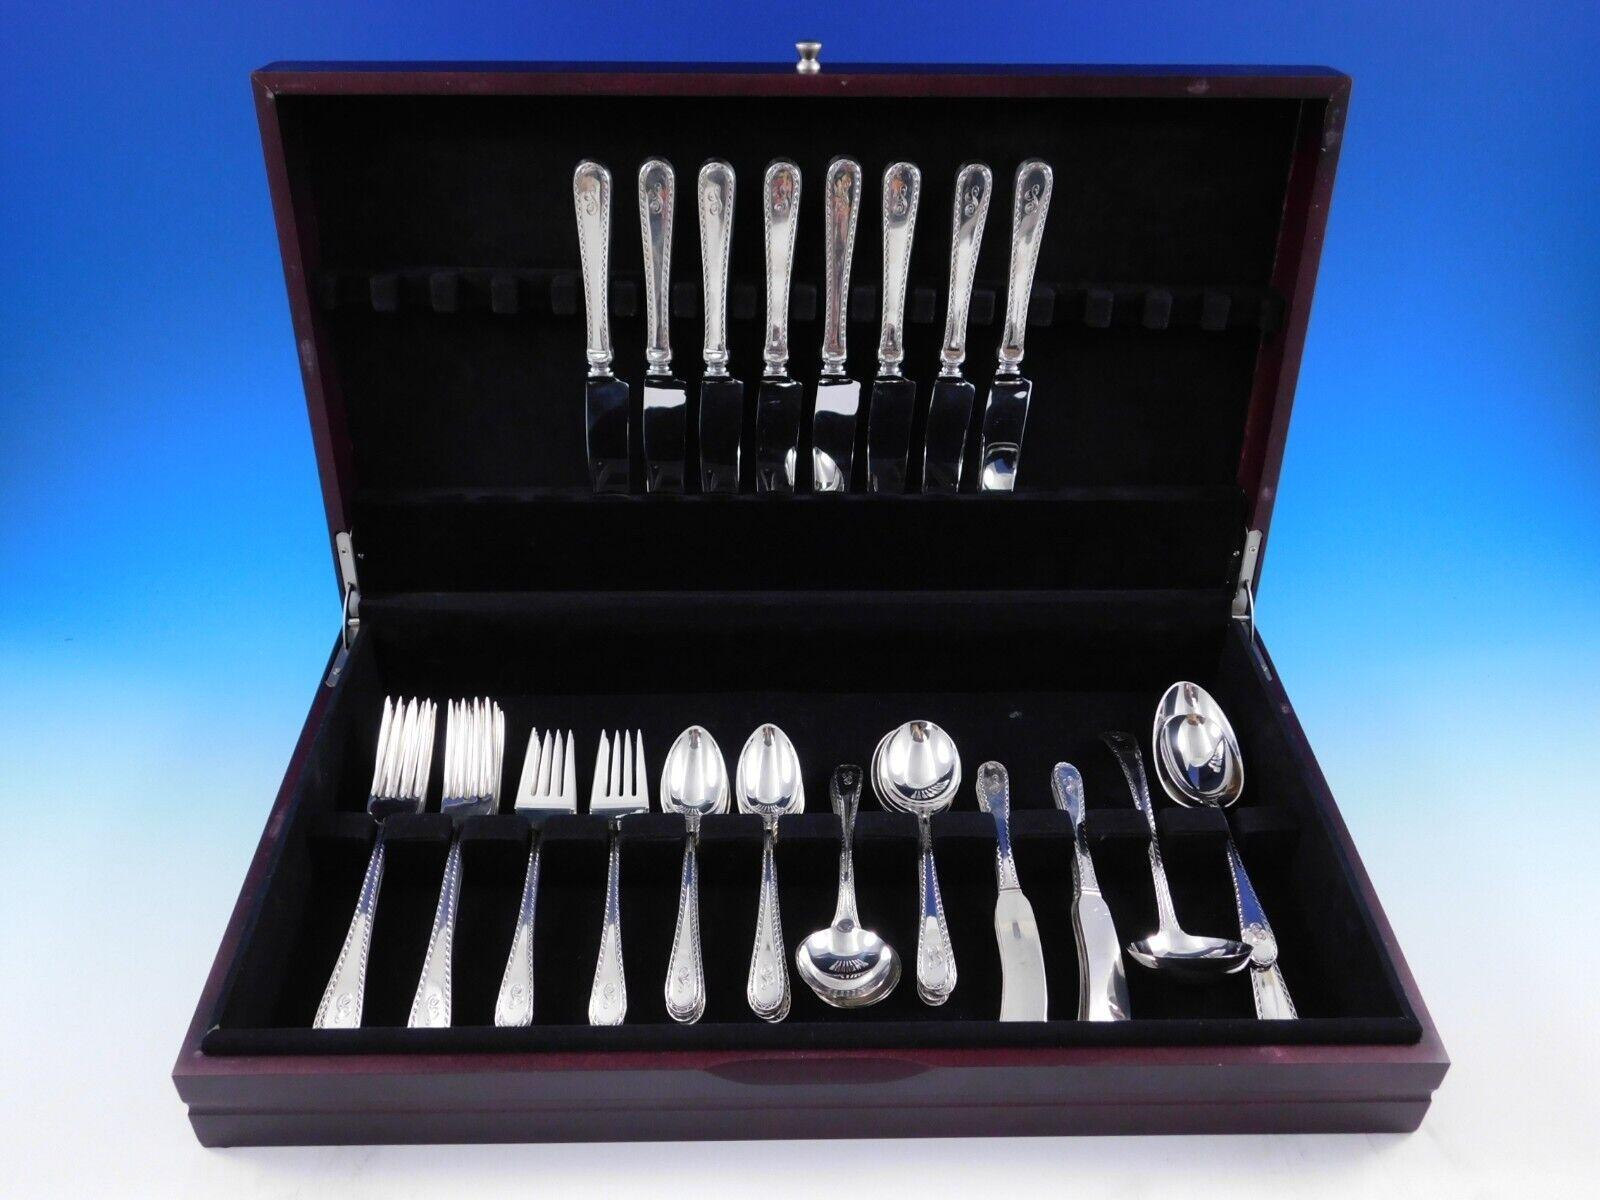 Winslow by Kirk Sterling Silver Flatware set, 51 pieces. This set includes:

8 Knives, 8 7/8